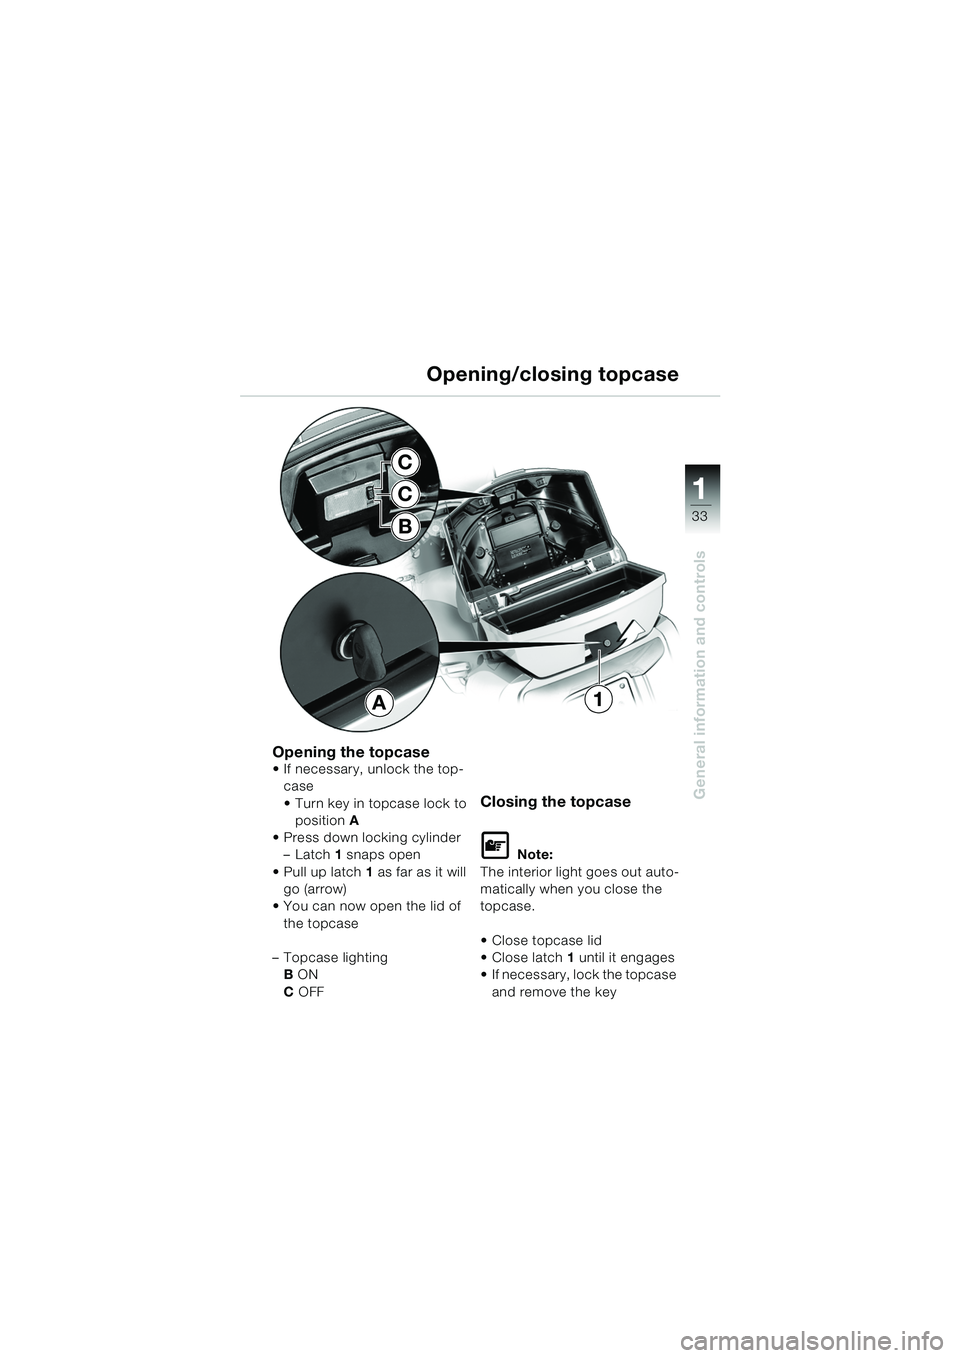 BMW MOTORRAD K 1200 LT 2005  Riders Manual (in English) 33
General information and controls
1
Opening/closing topcase
Opening the topcase If necessary, unlock the top-case 
 Turn key in topcase lock to position  A 
 Press down locking cylinder –Latch 